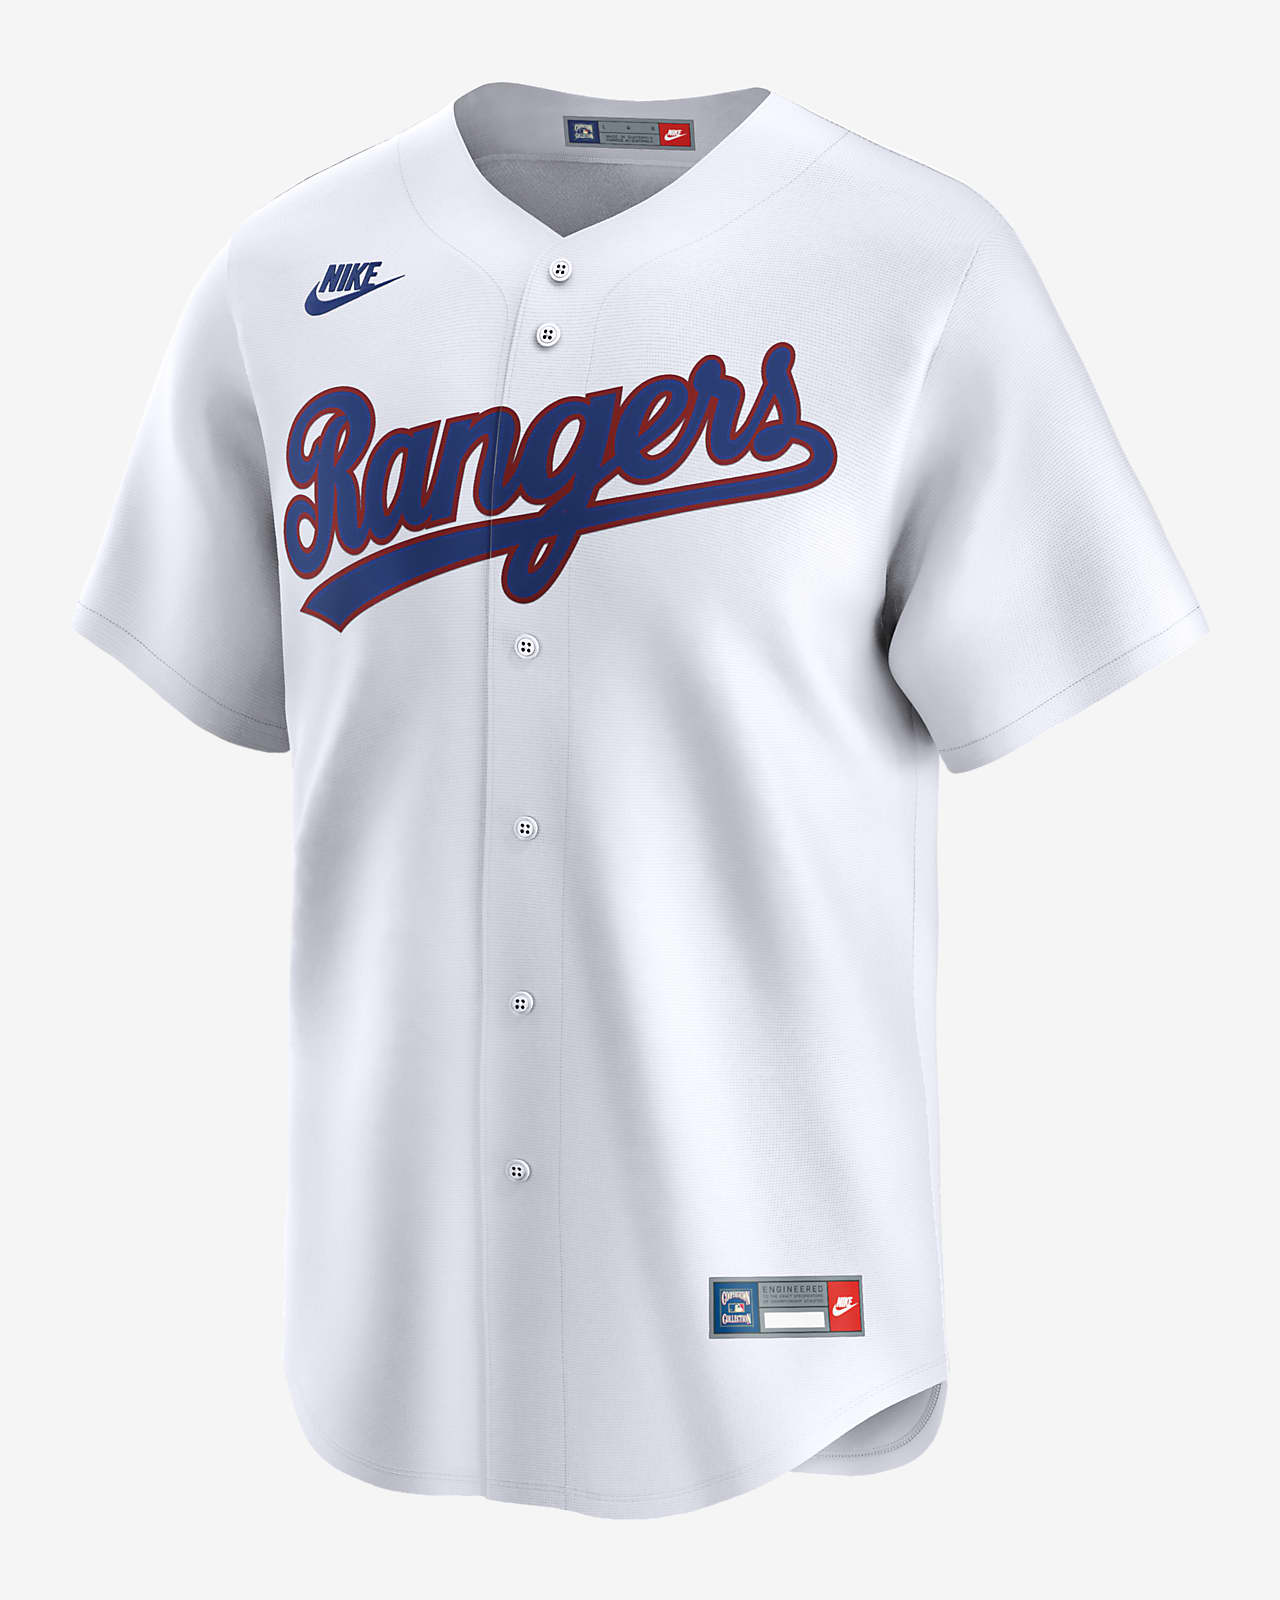 Texas Rangers Cooperstown Men's Nike Dri-FIT ADV MLB Limited Jersey